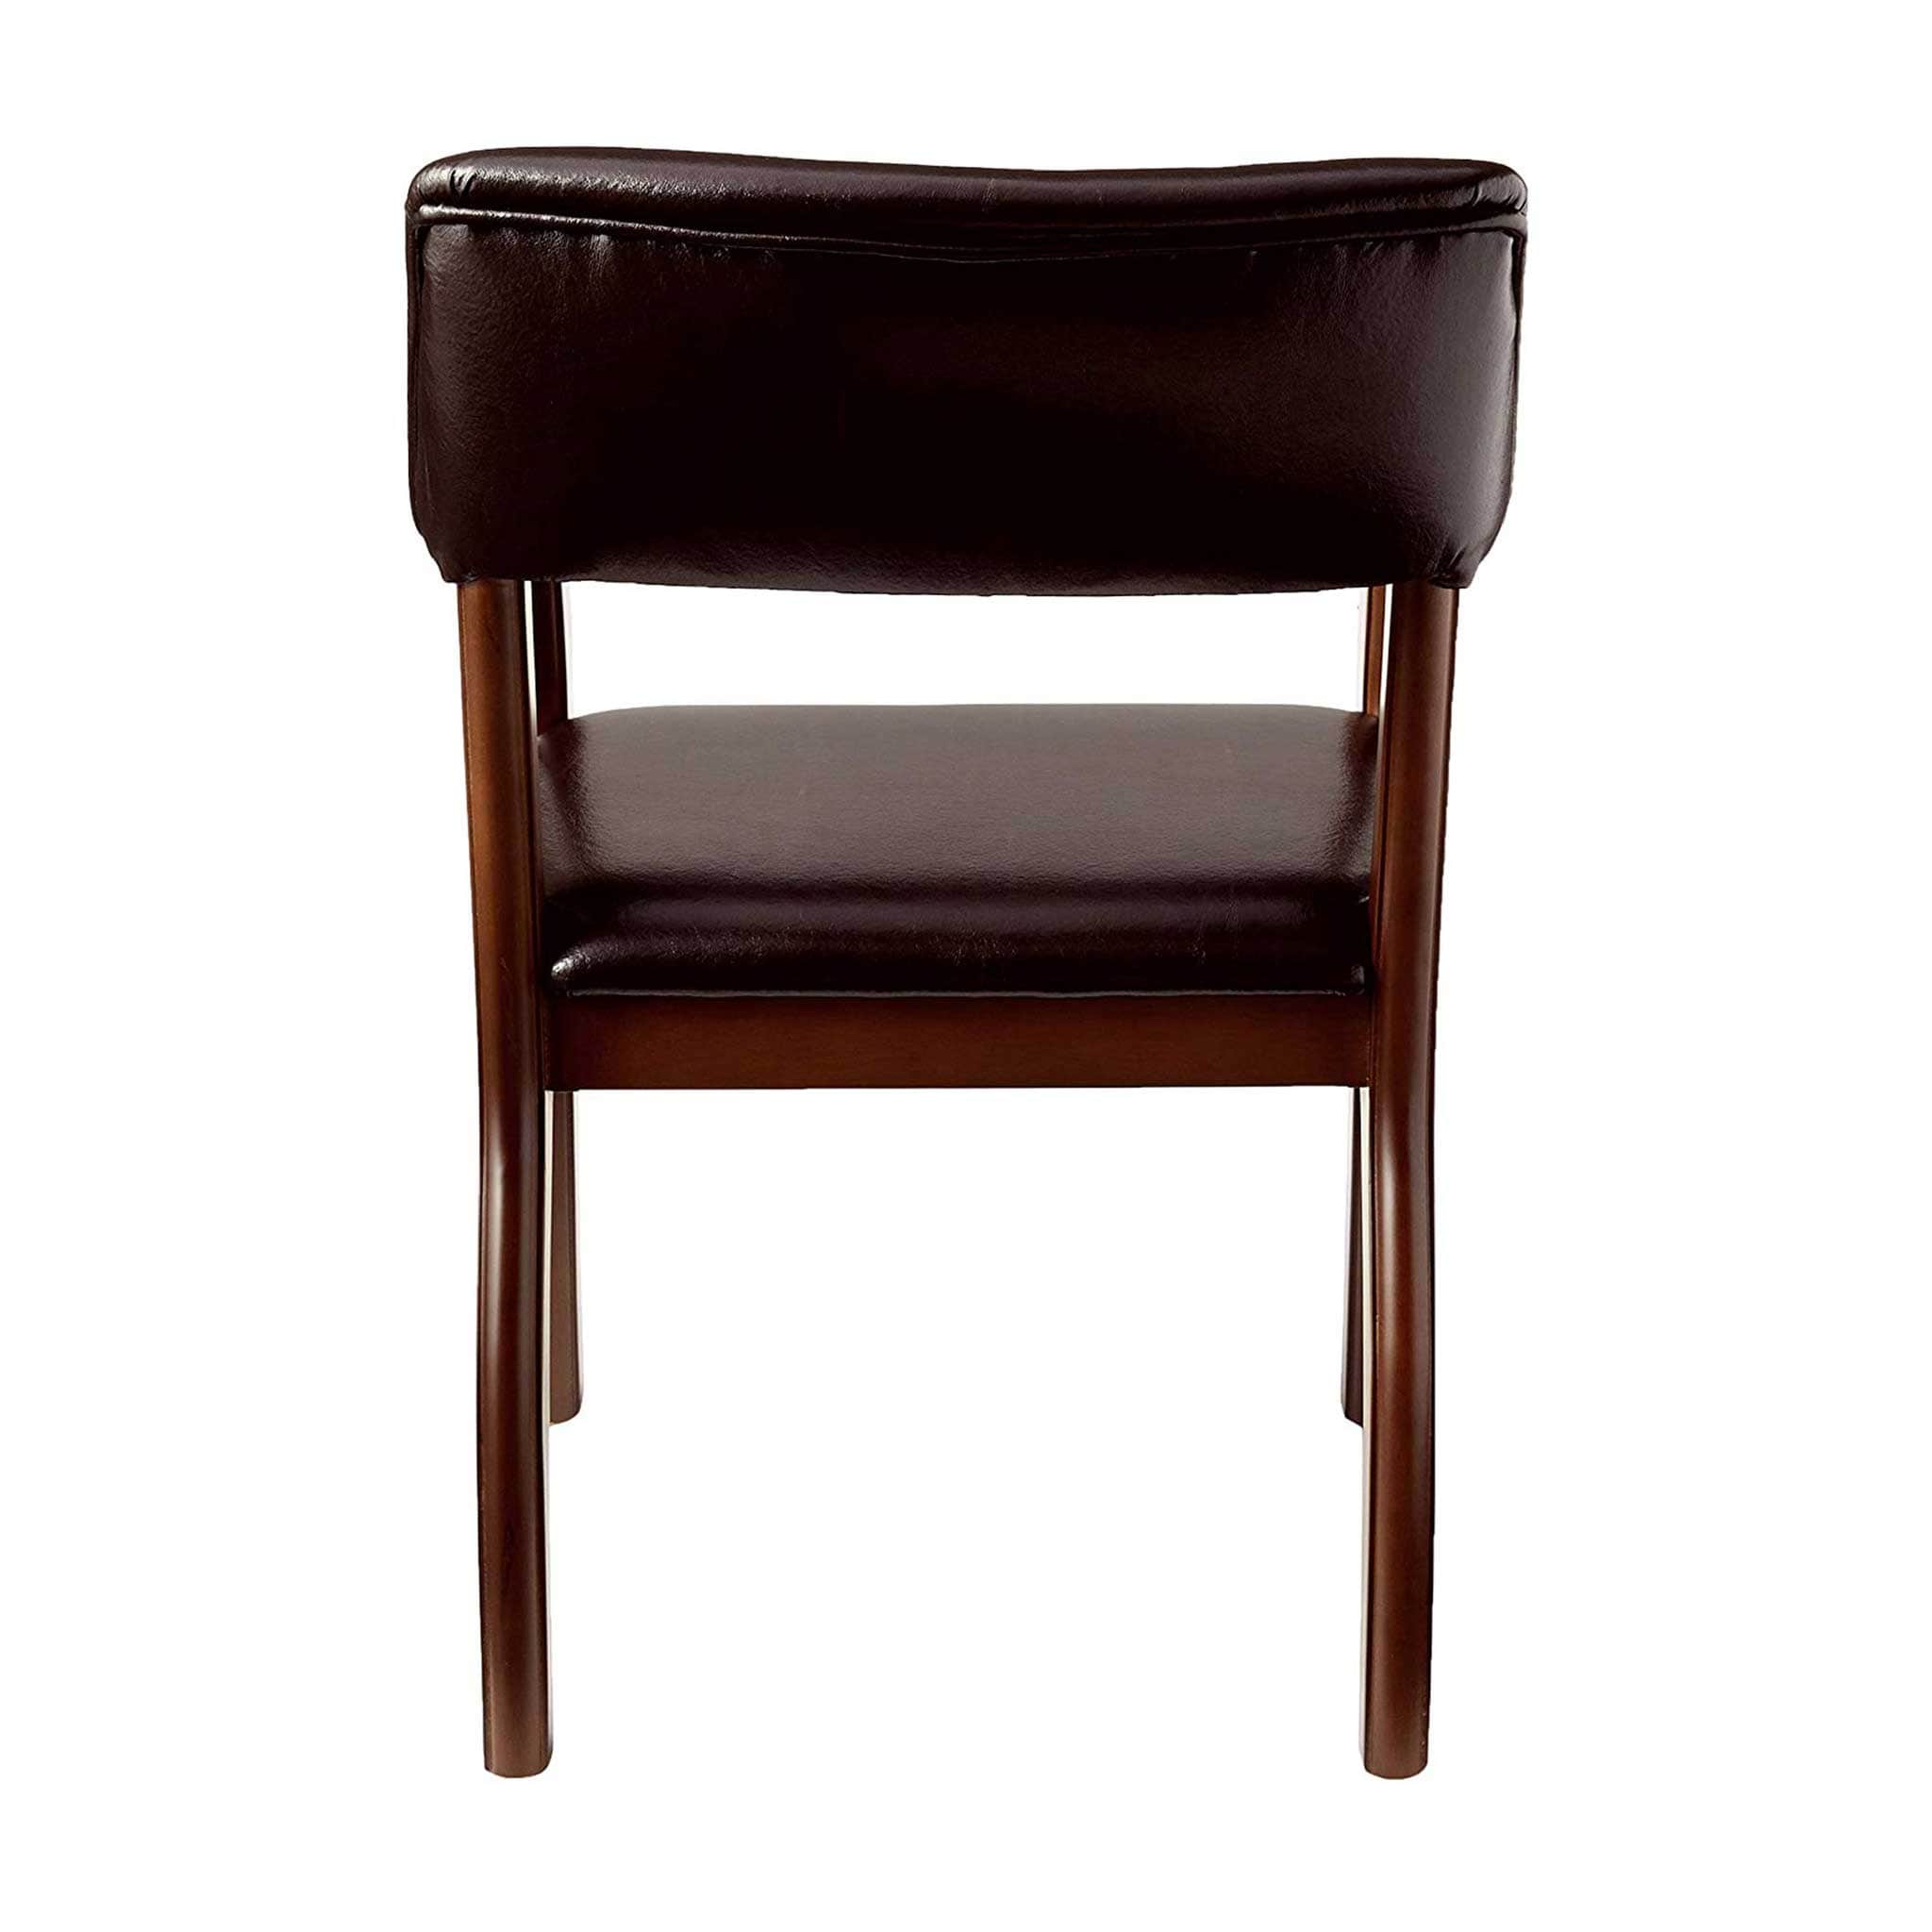 Pirate Brown Leatherette Chair